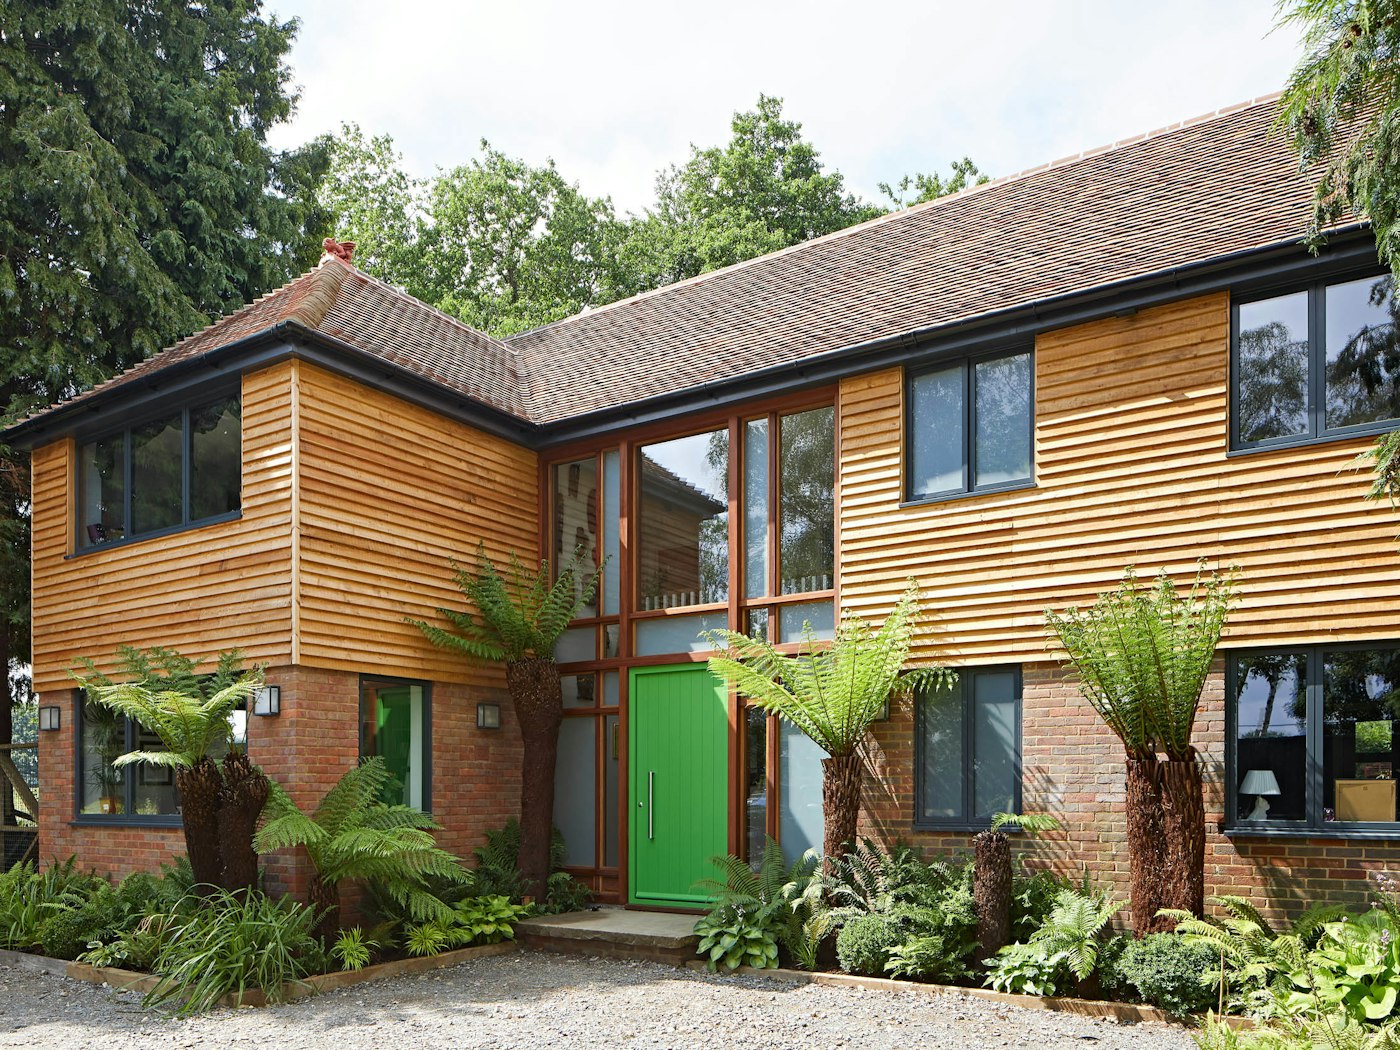 With more neutral cladding and brick tones, this bold green door adds a touch of the tropical to this beautiful property